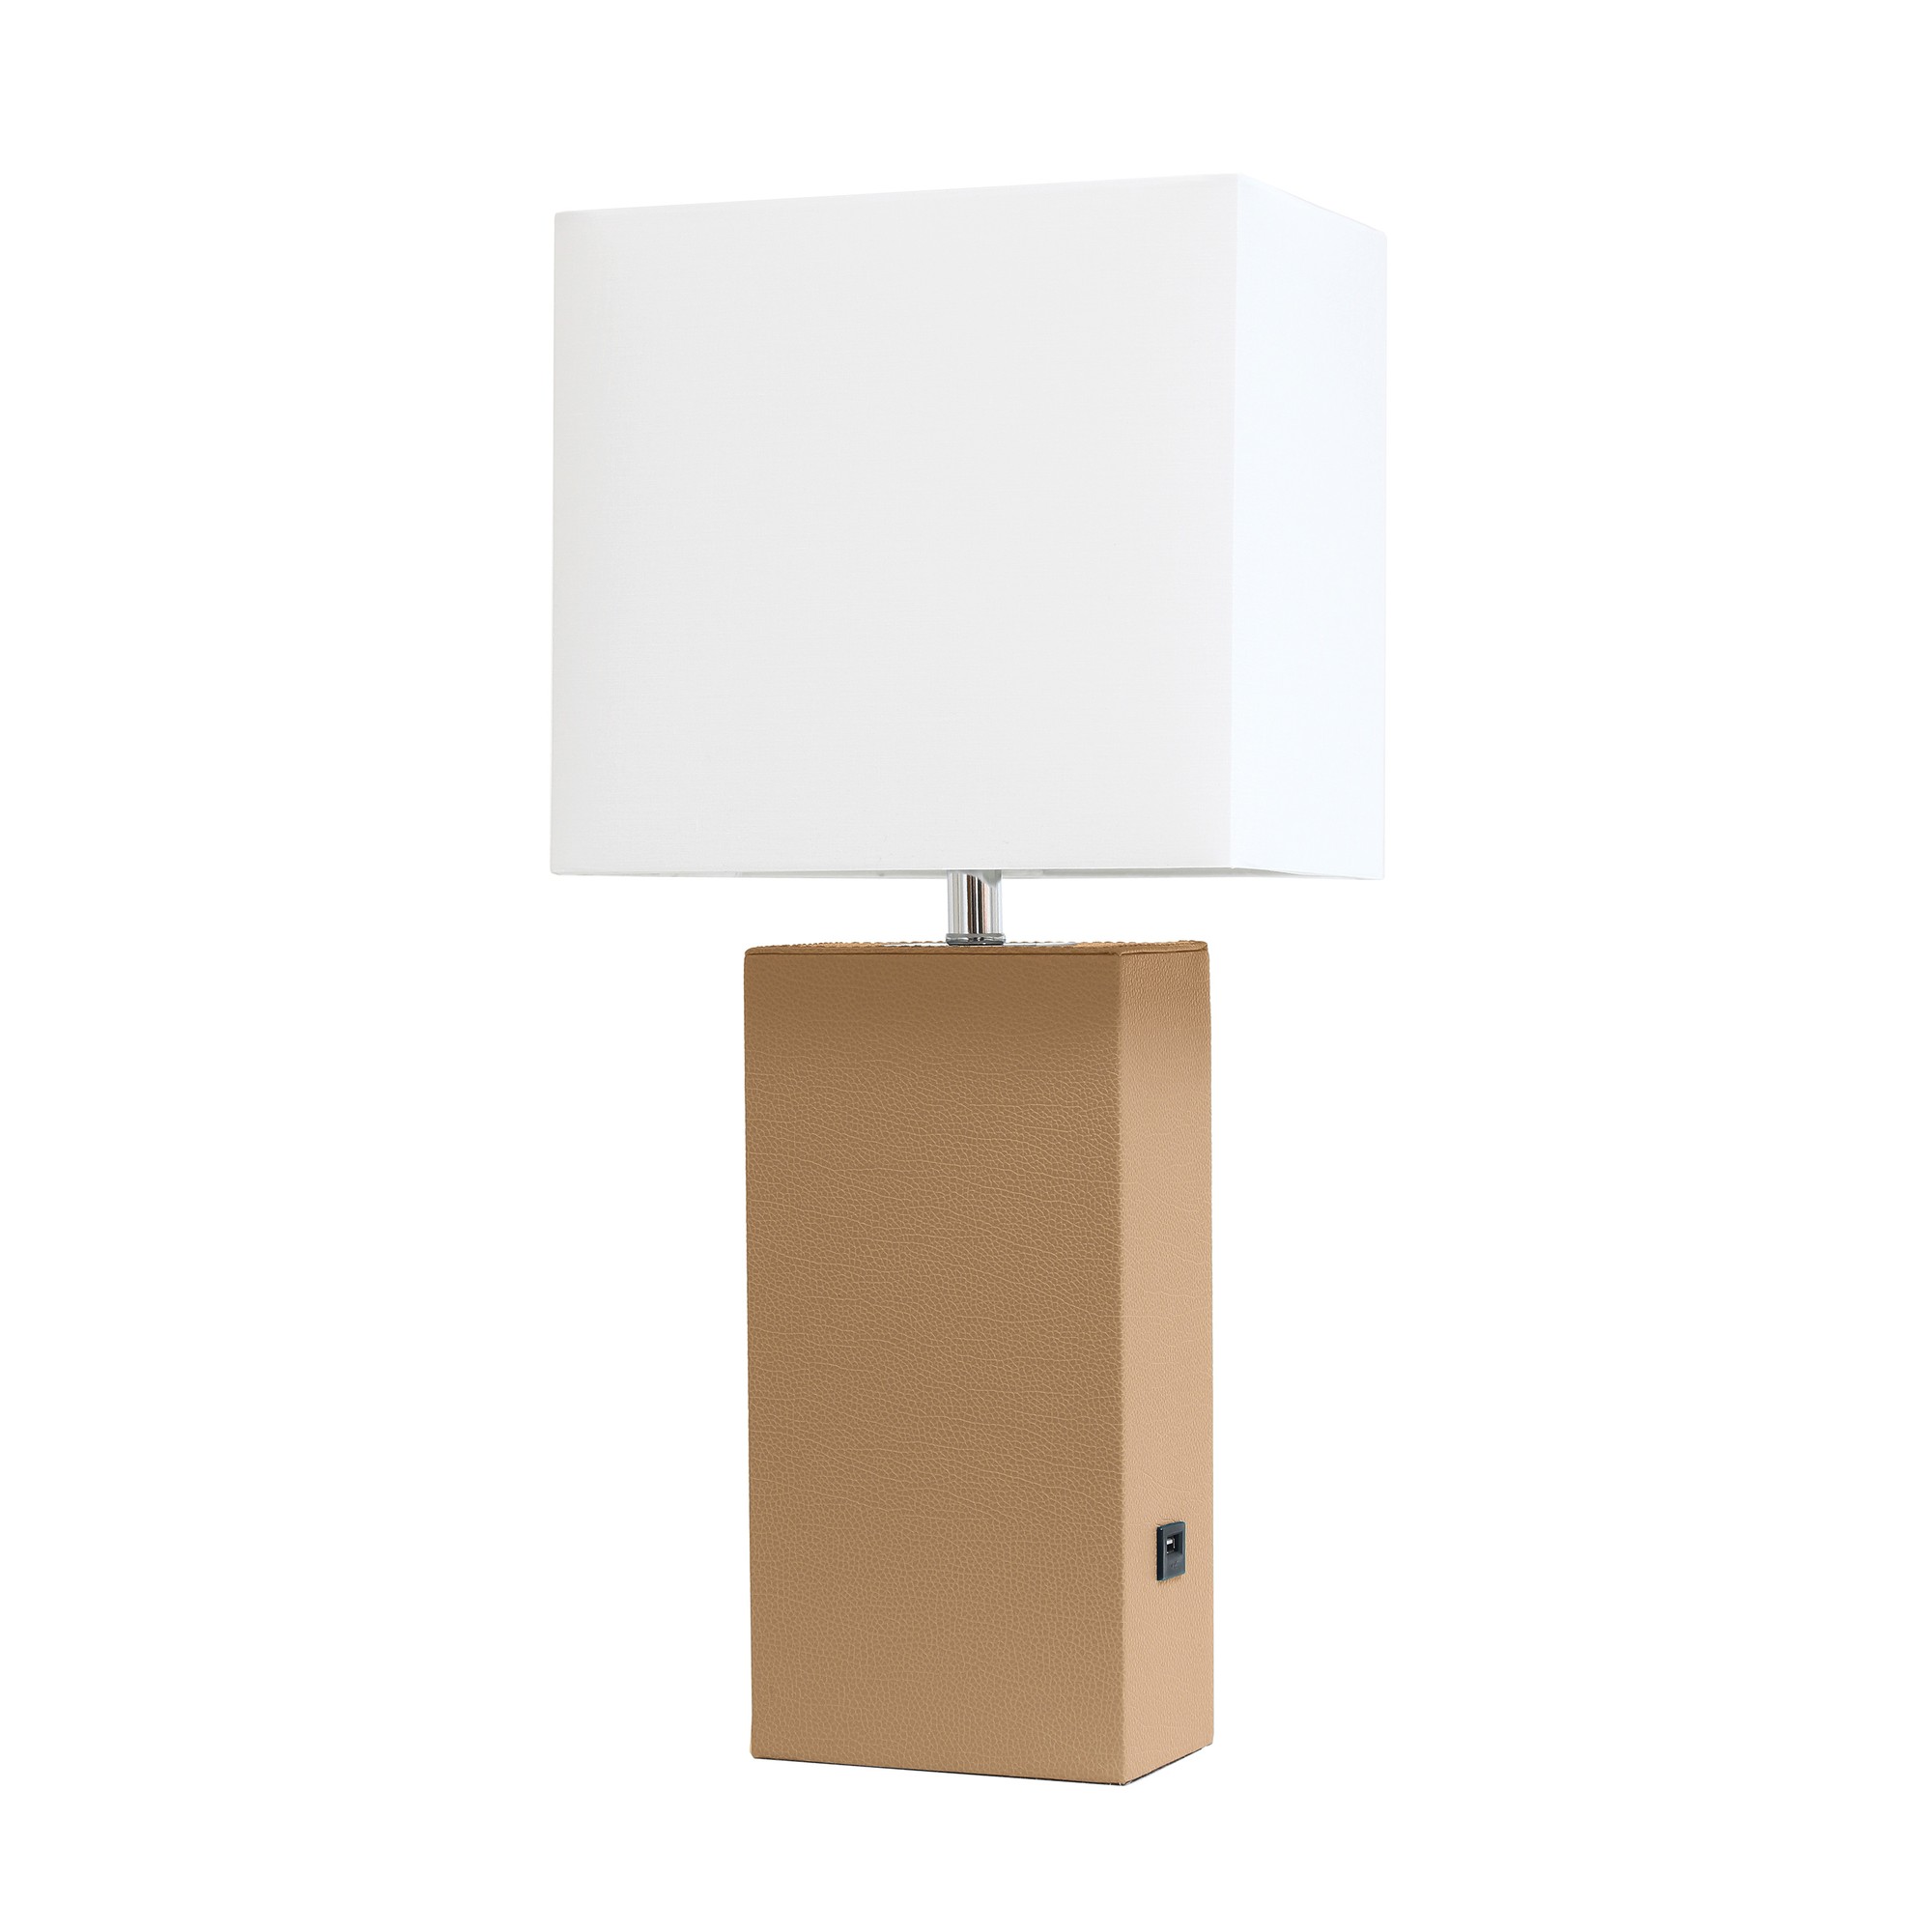 21in Table Lamp USB Charg Port White Shade Beige